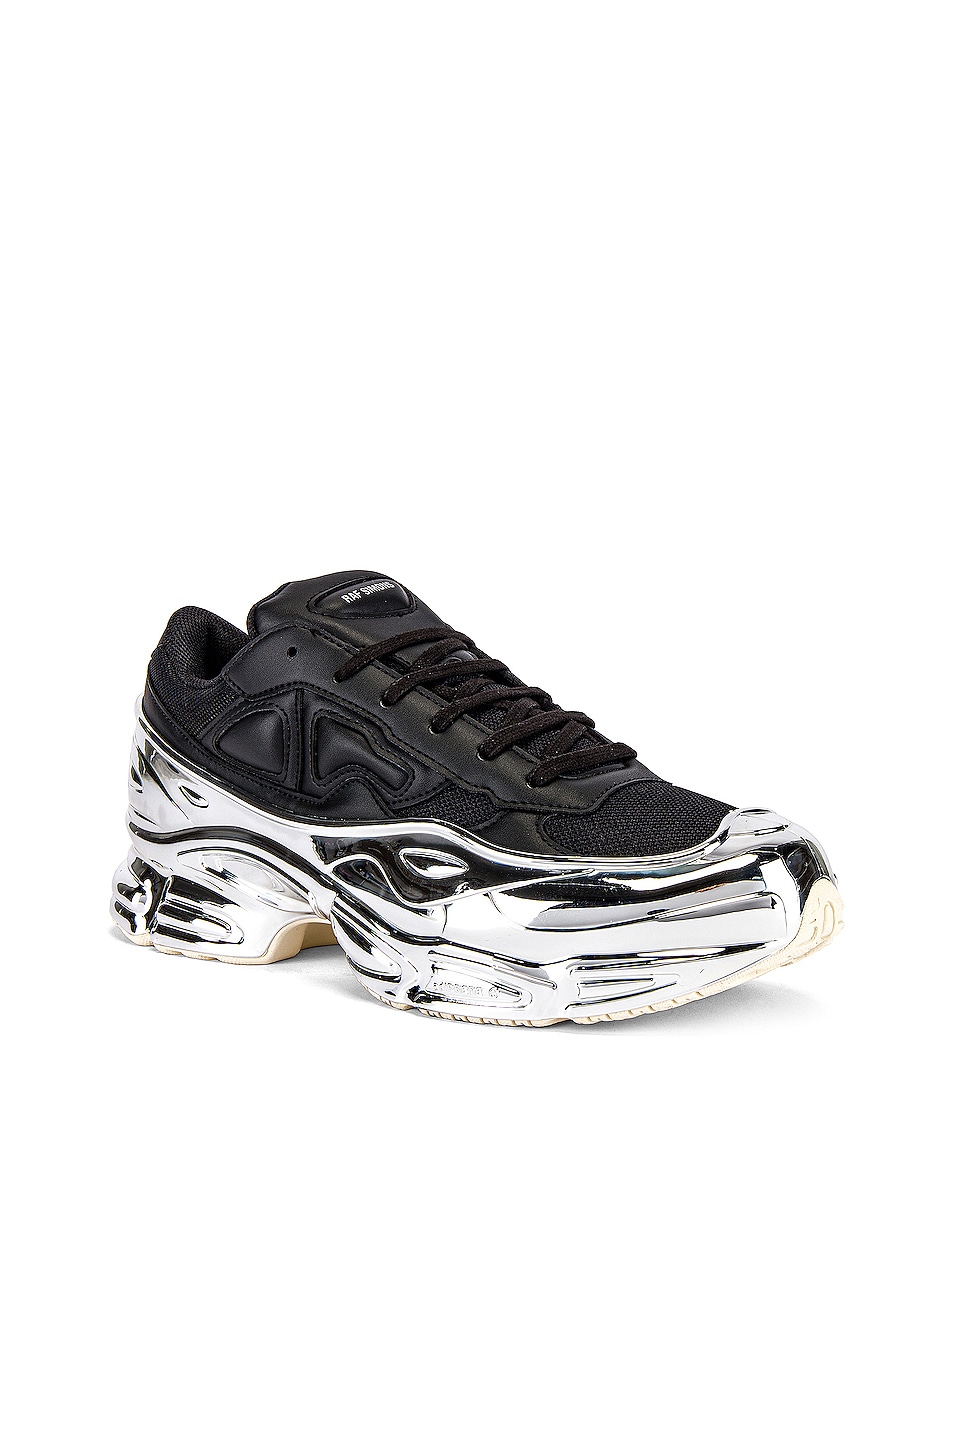 Image 1 of adidas by Raf Simons Ozweego Sneaker in Black & Silver